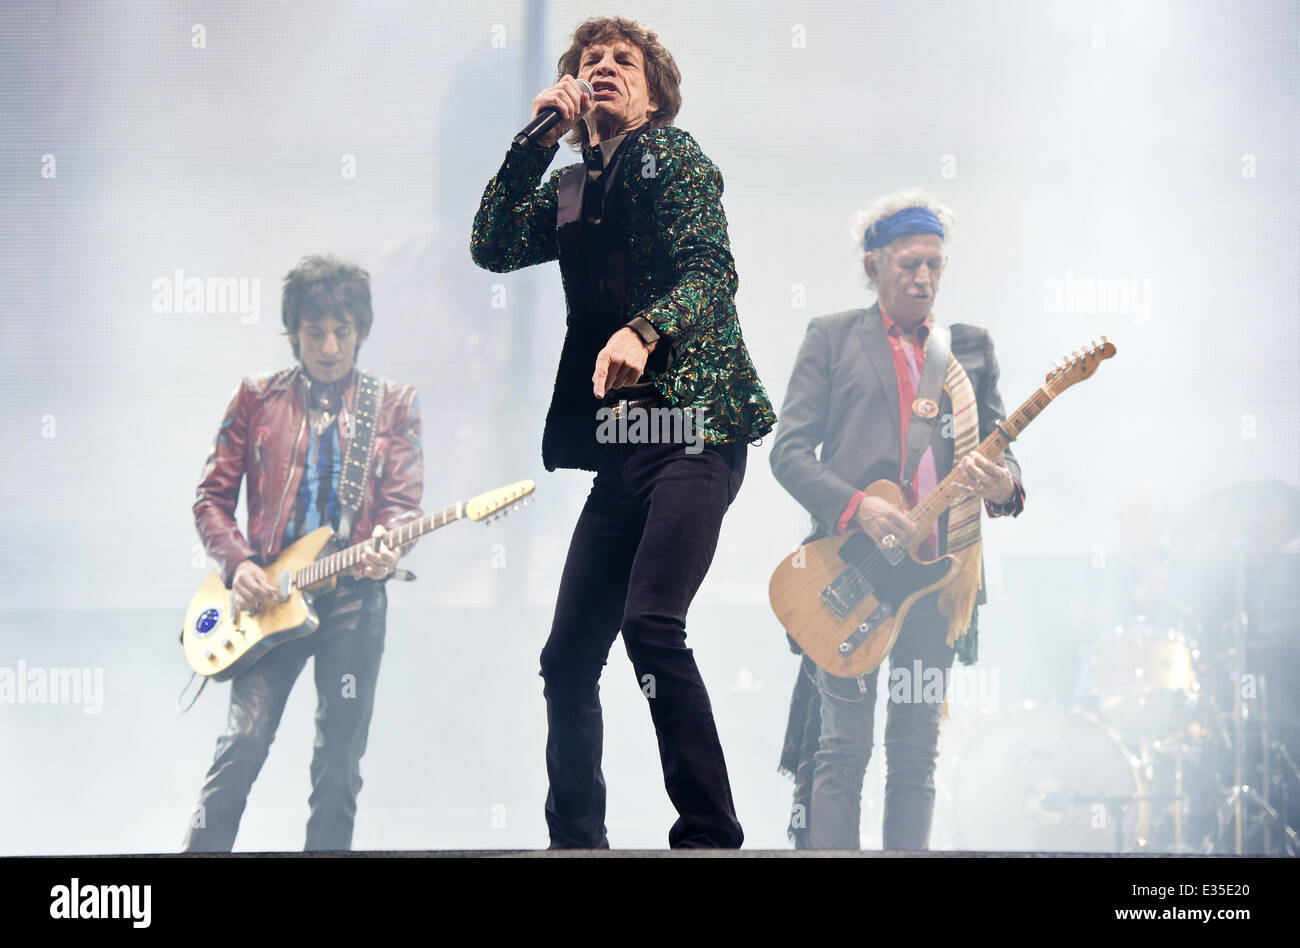 The 2013 Glastonbury Festival - Day 2 - Performances  Featuring: The Rolling Stones,Mick Jagger,Keith Richards,Ronnie Wood Where: Glastonbury, United Kingdom When: 29 Jun 2013 Stock Photo